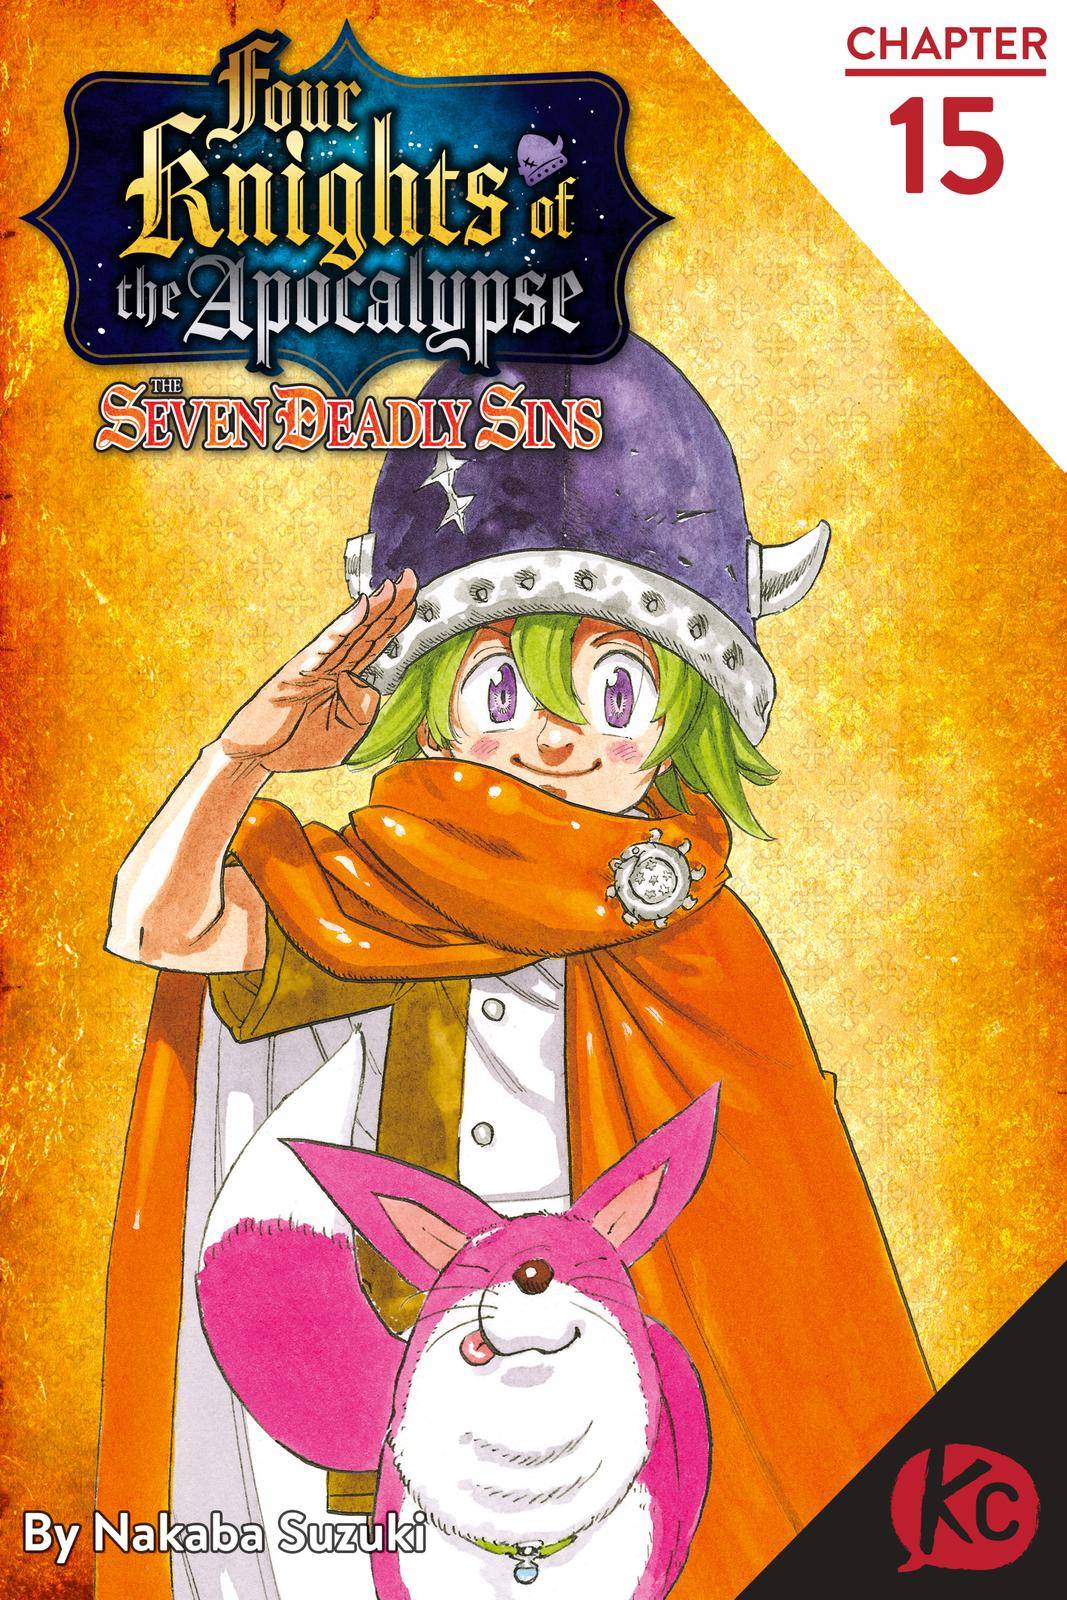 The Seven Deadly Sins: Four Knights of the Apocalypse Chapter 15